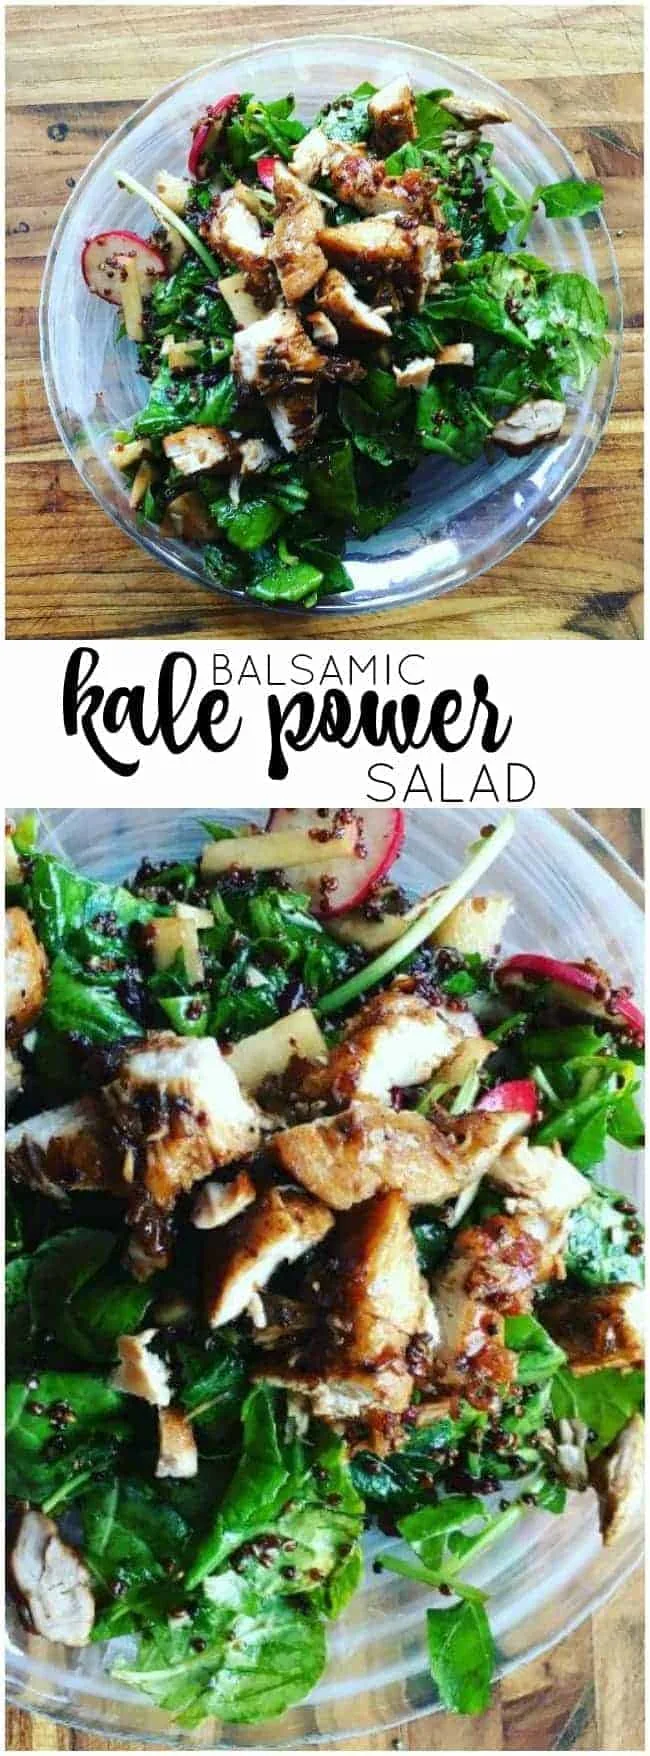 Less that 15 minutes and you have a deliciously filling Balsamic Kale Power Salad. High in protein and so so good!